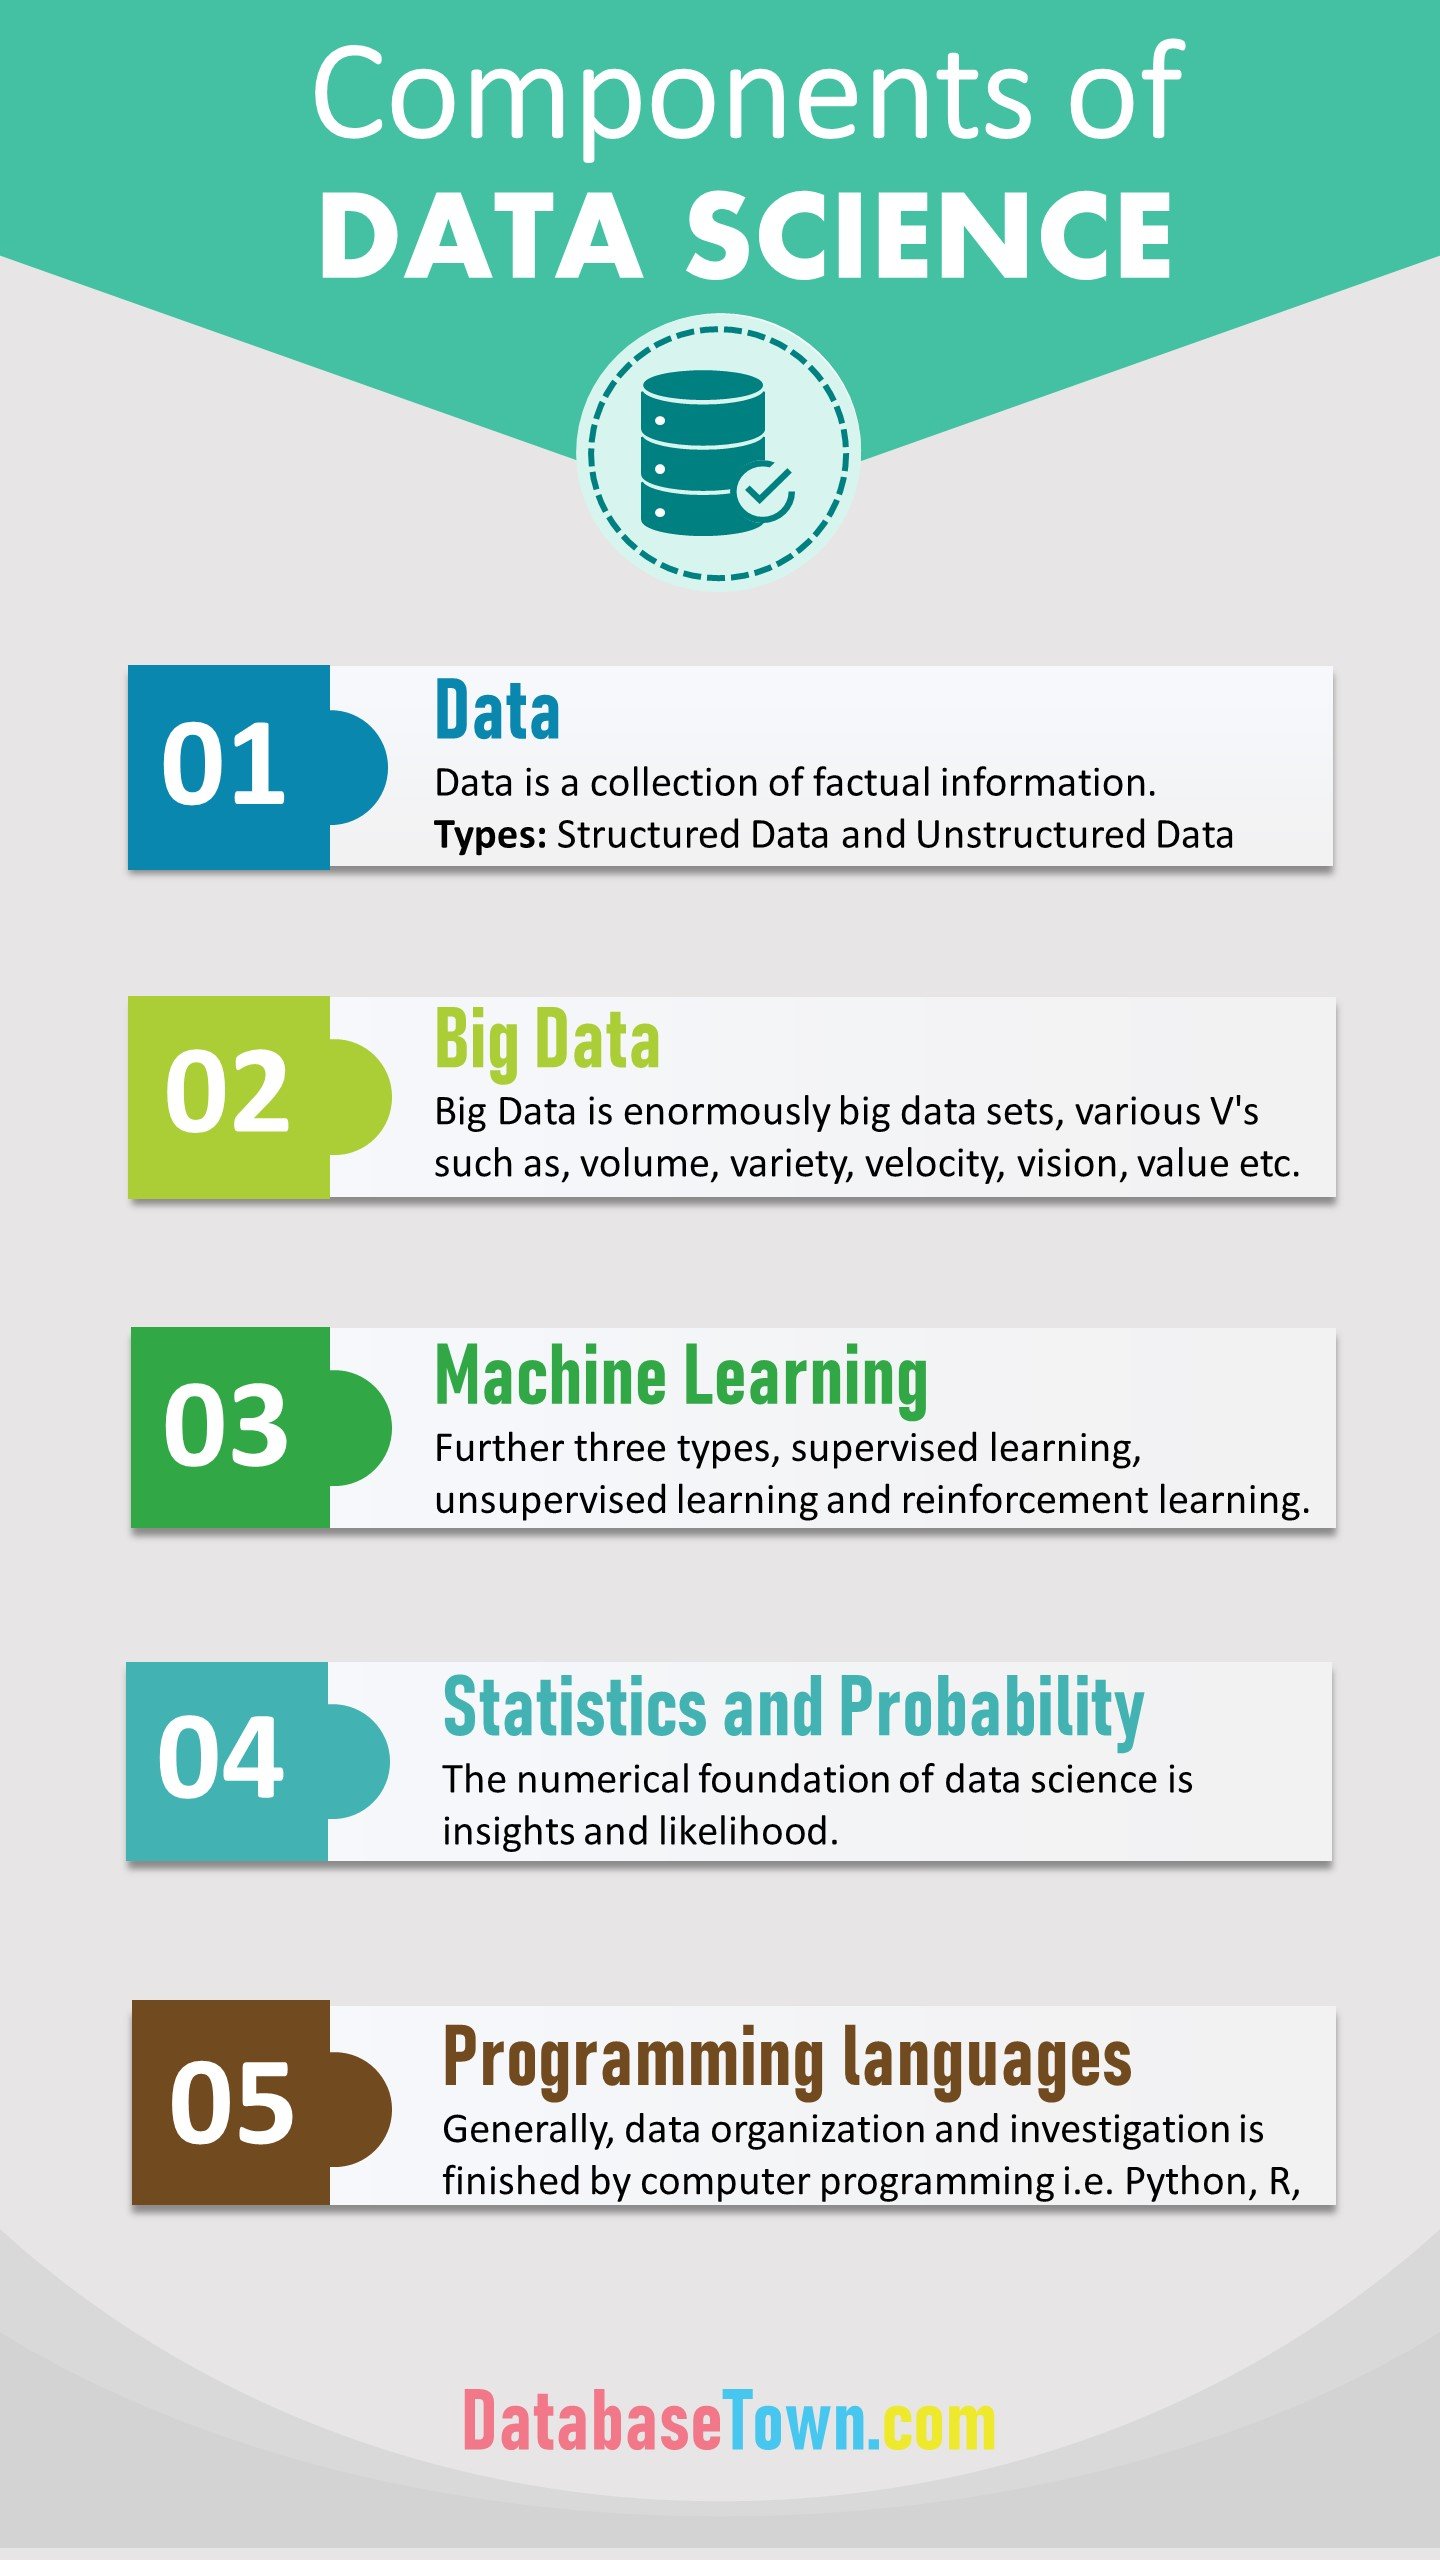 Components of data science infographic